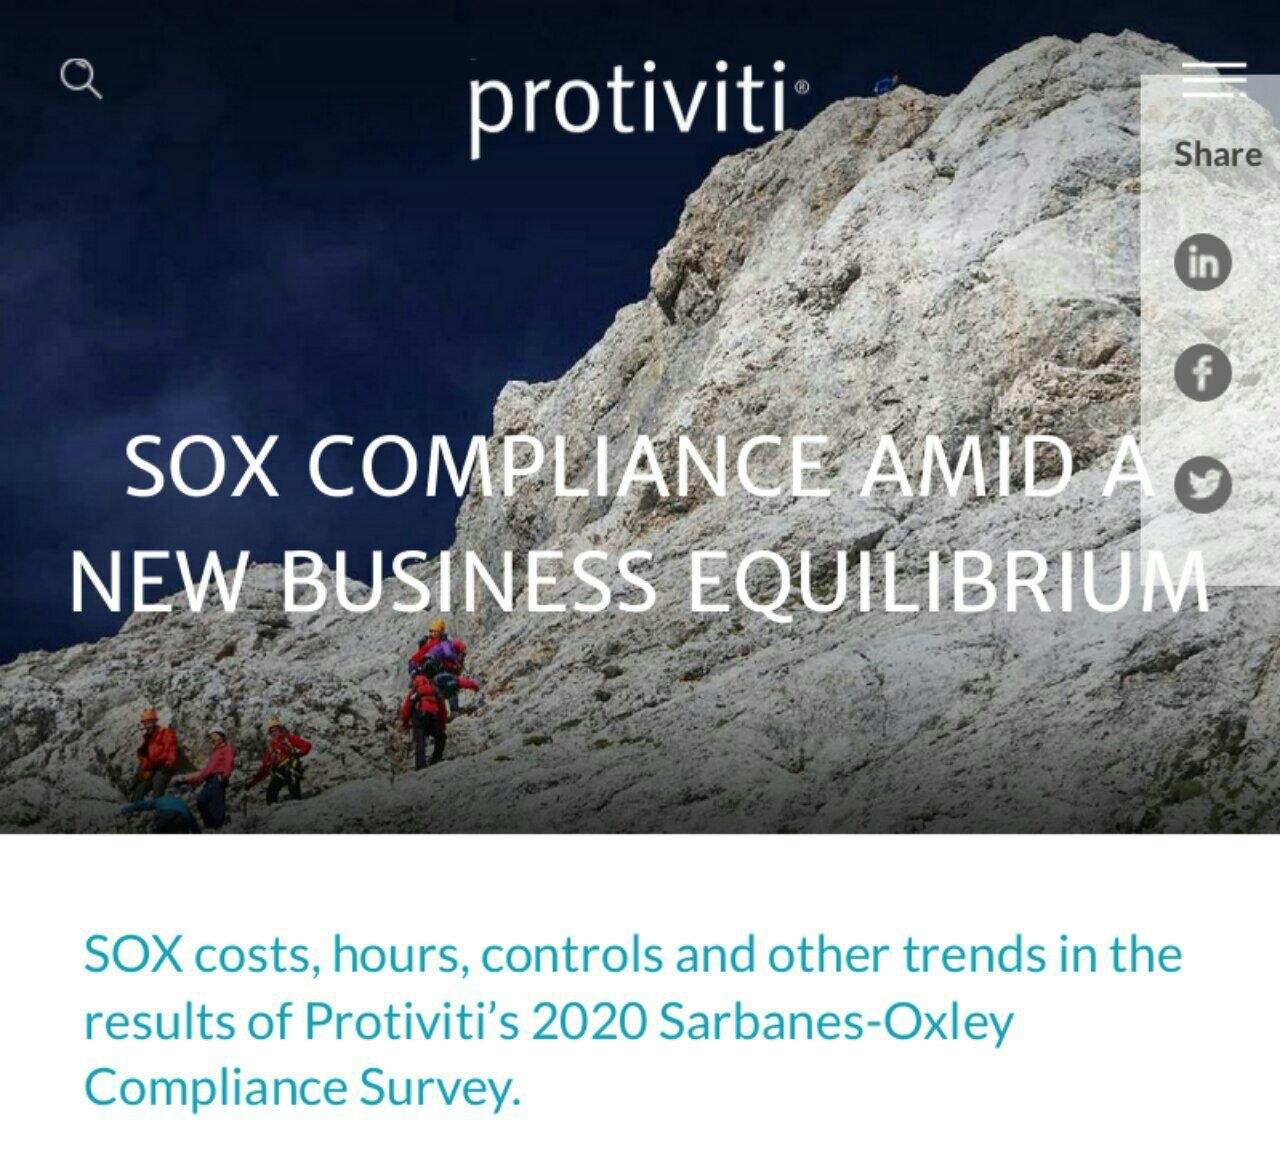 SOX Compliance Amid a New Business Equilibrium